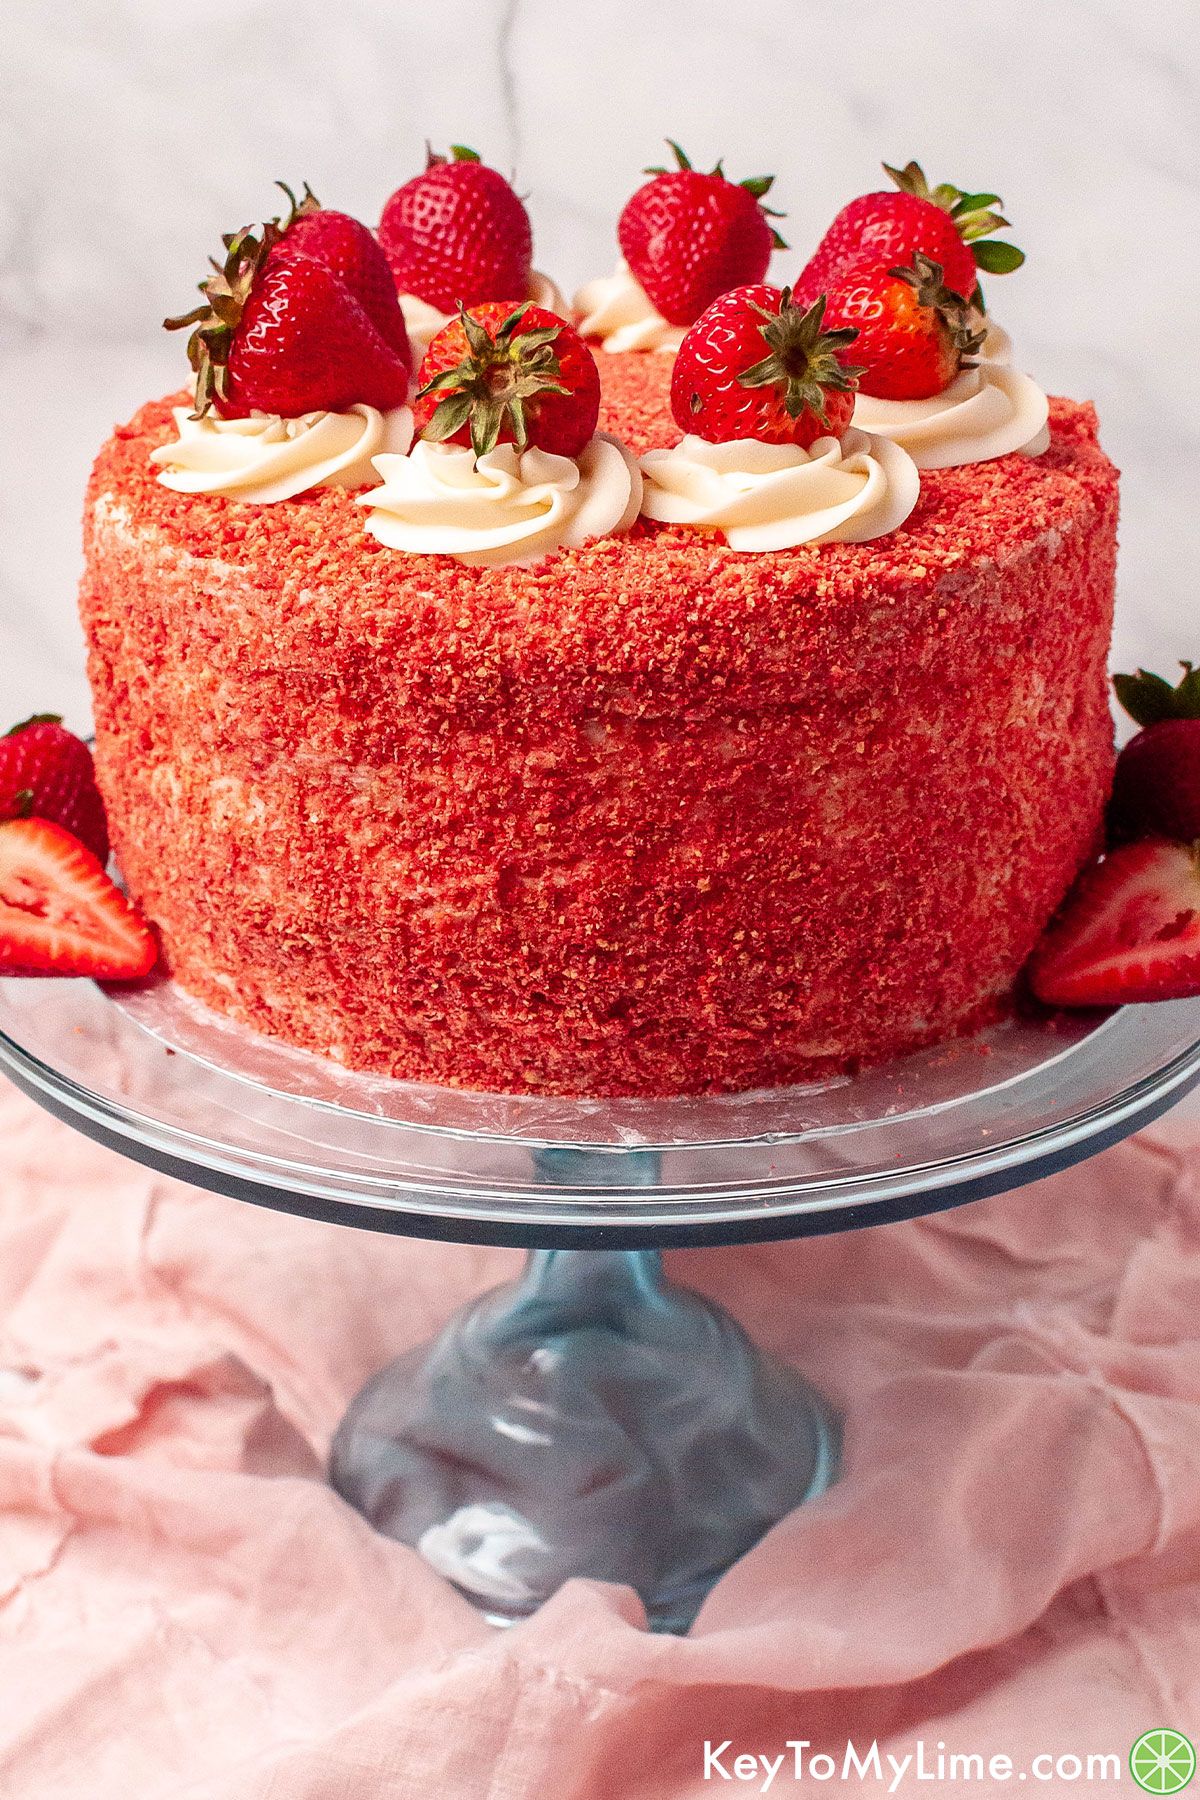 A decorated strawberry crunch cake on a blue glass cake stand.